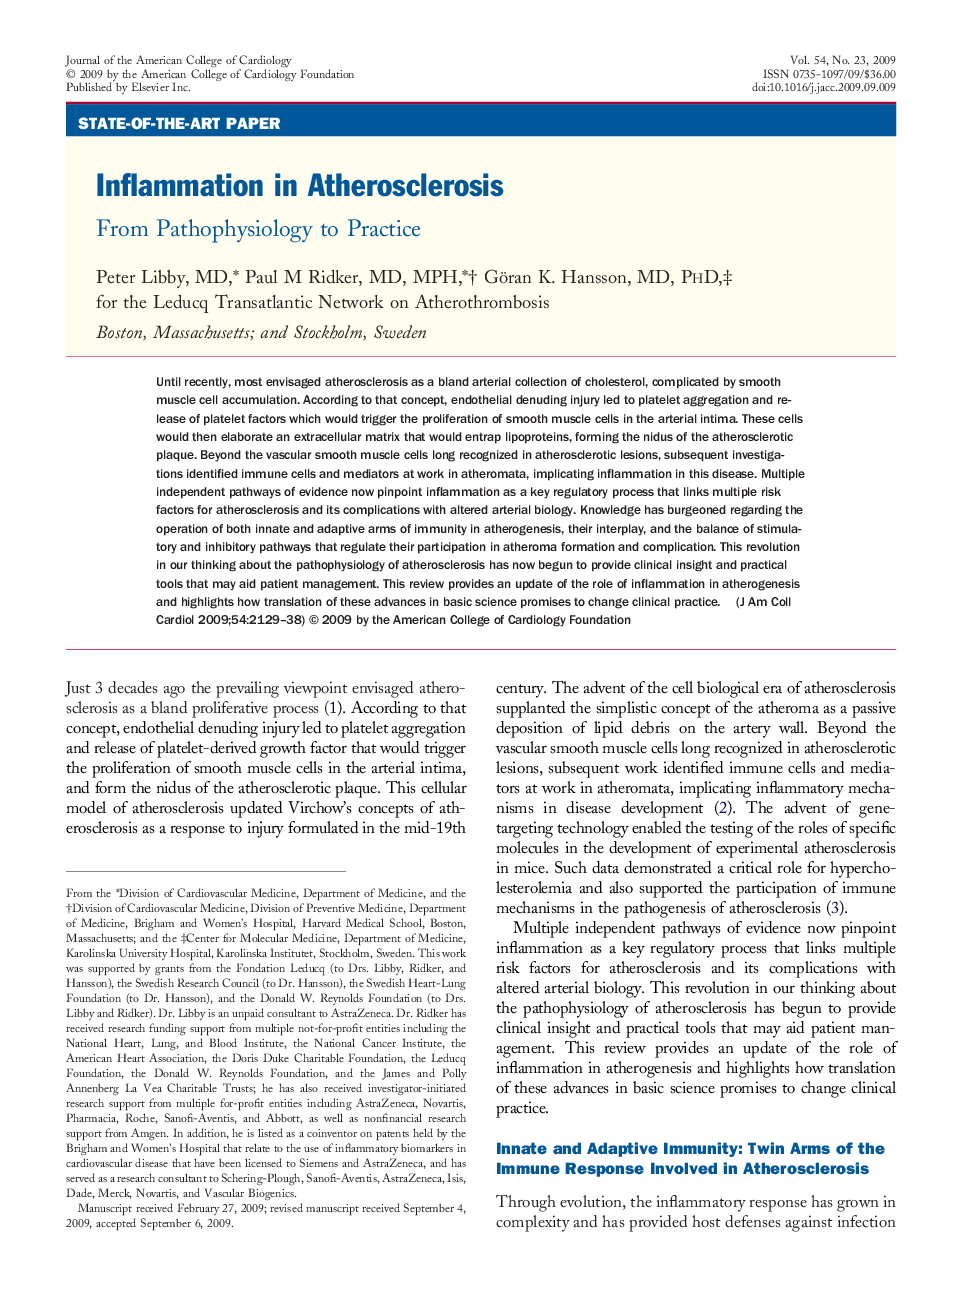 Inflammation in Atherosclerosis : From Pathophysiology to Practice